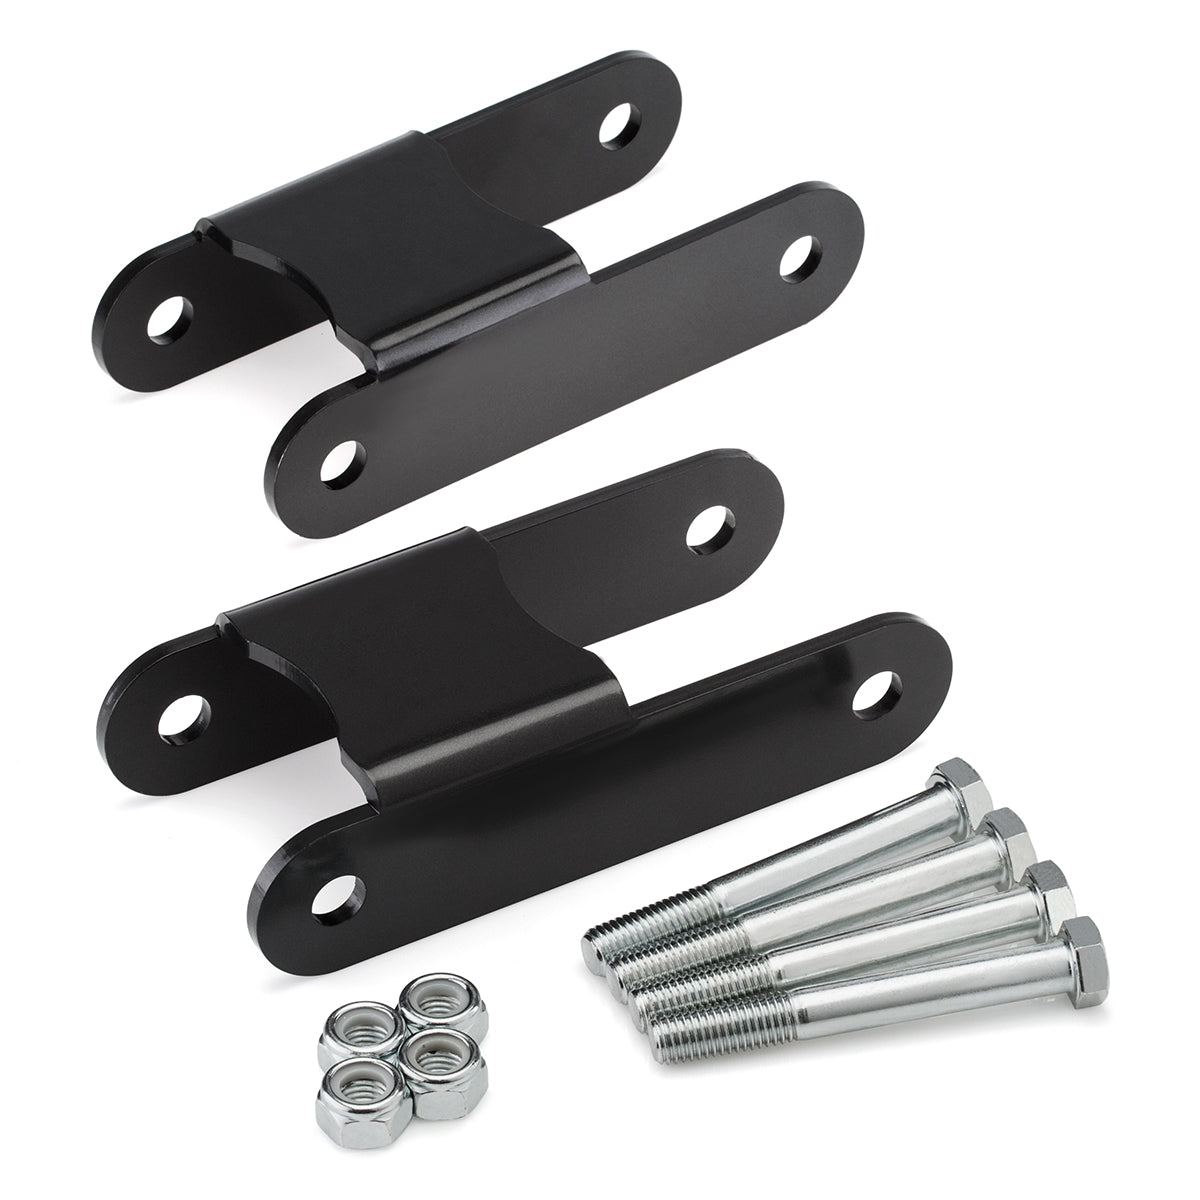 2004-2012 Chevrolet Colorado Full Lift Kit with Extended Shocks and Torsion Key Unloading/Removal Tool